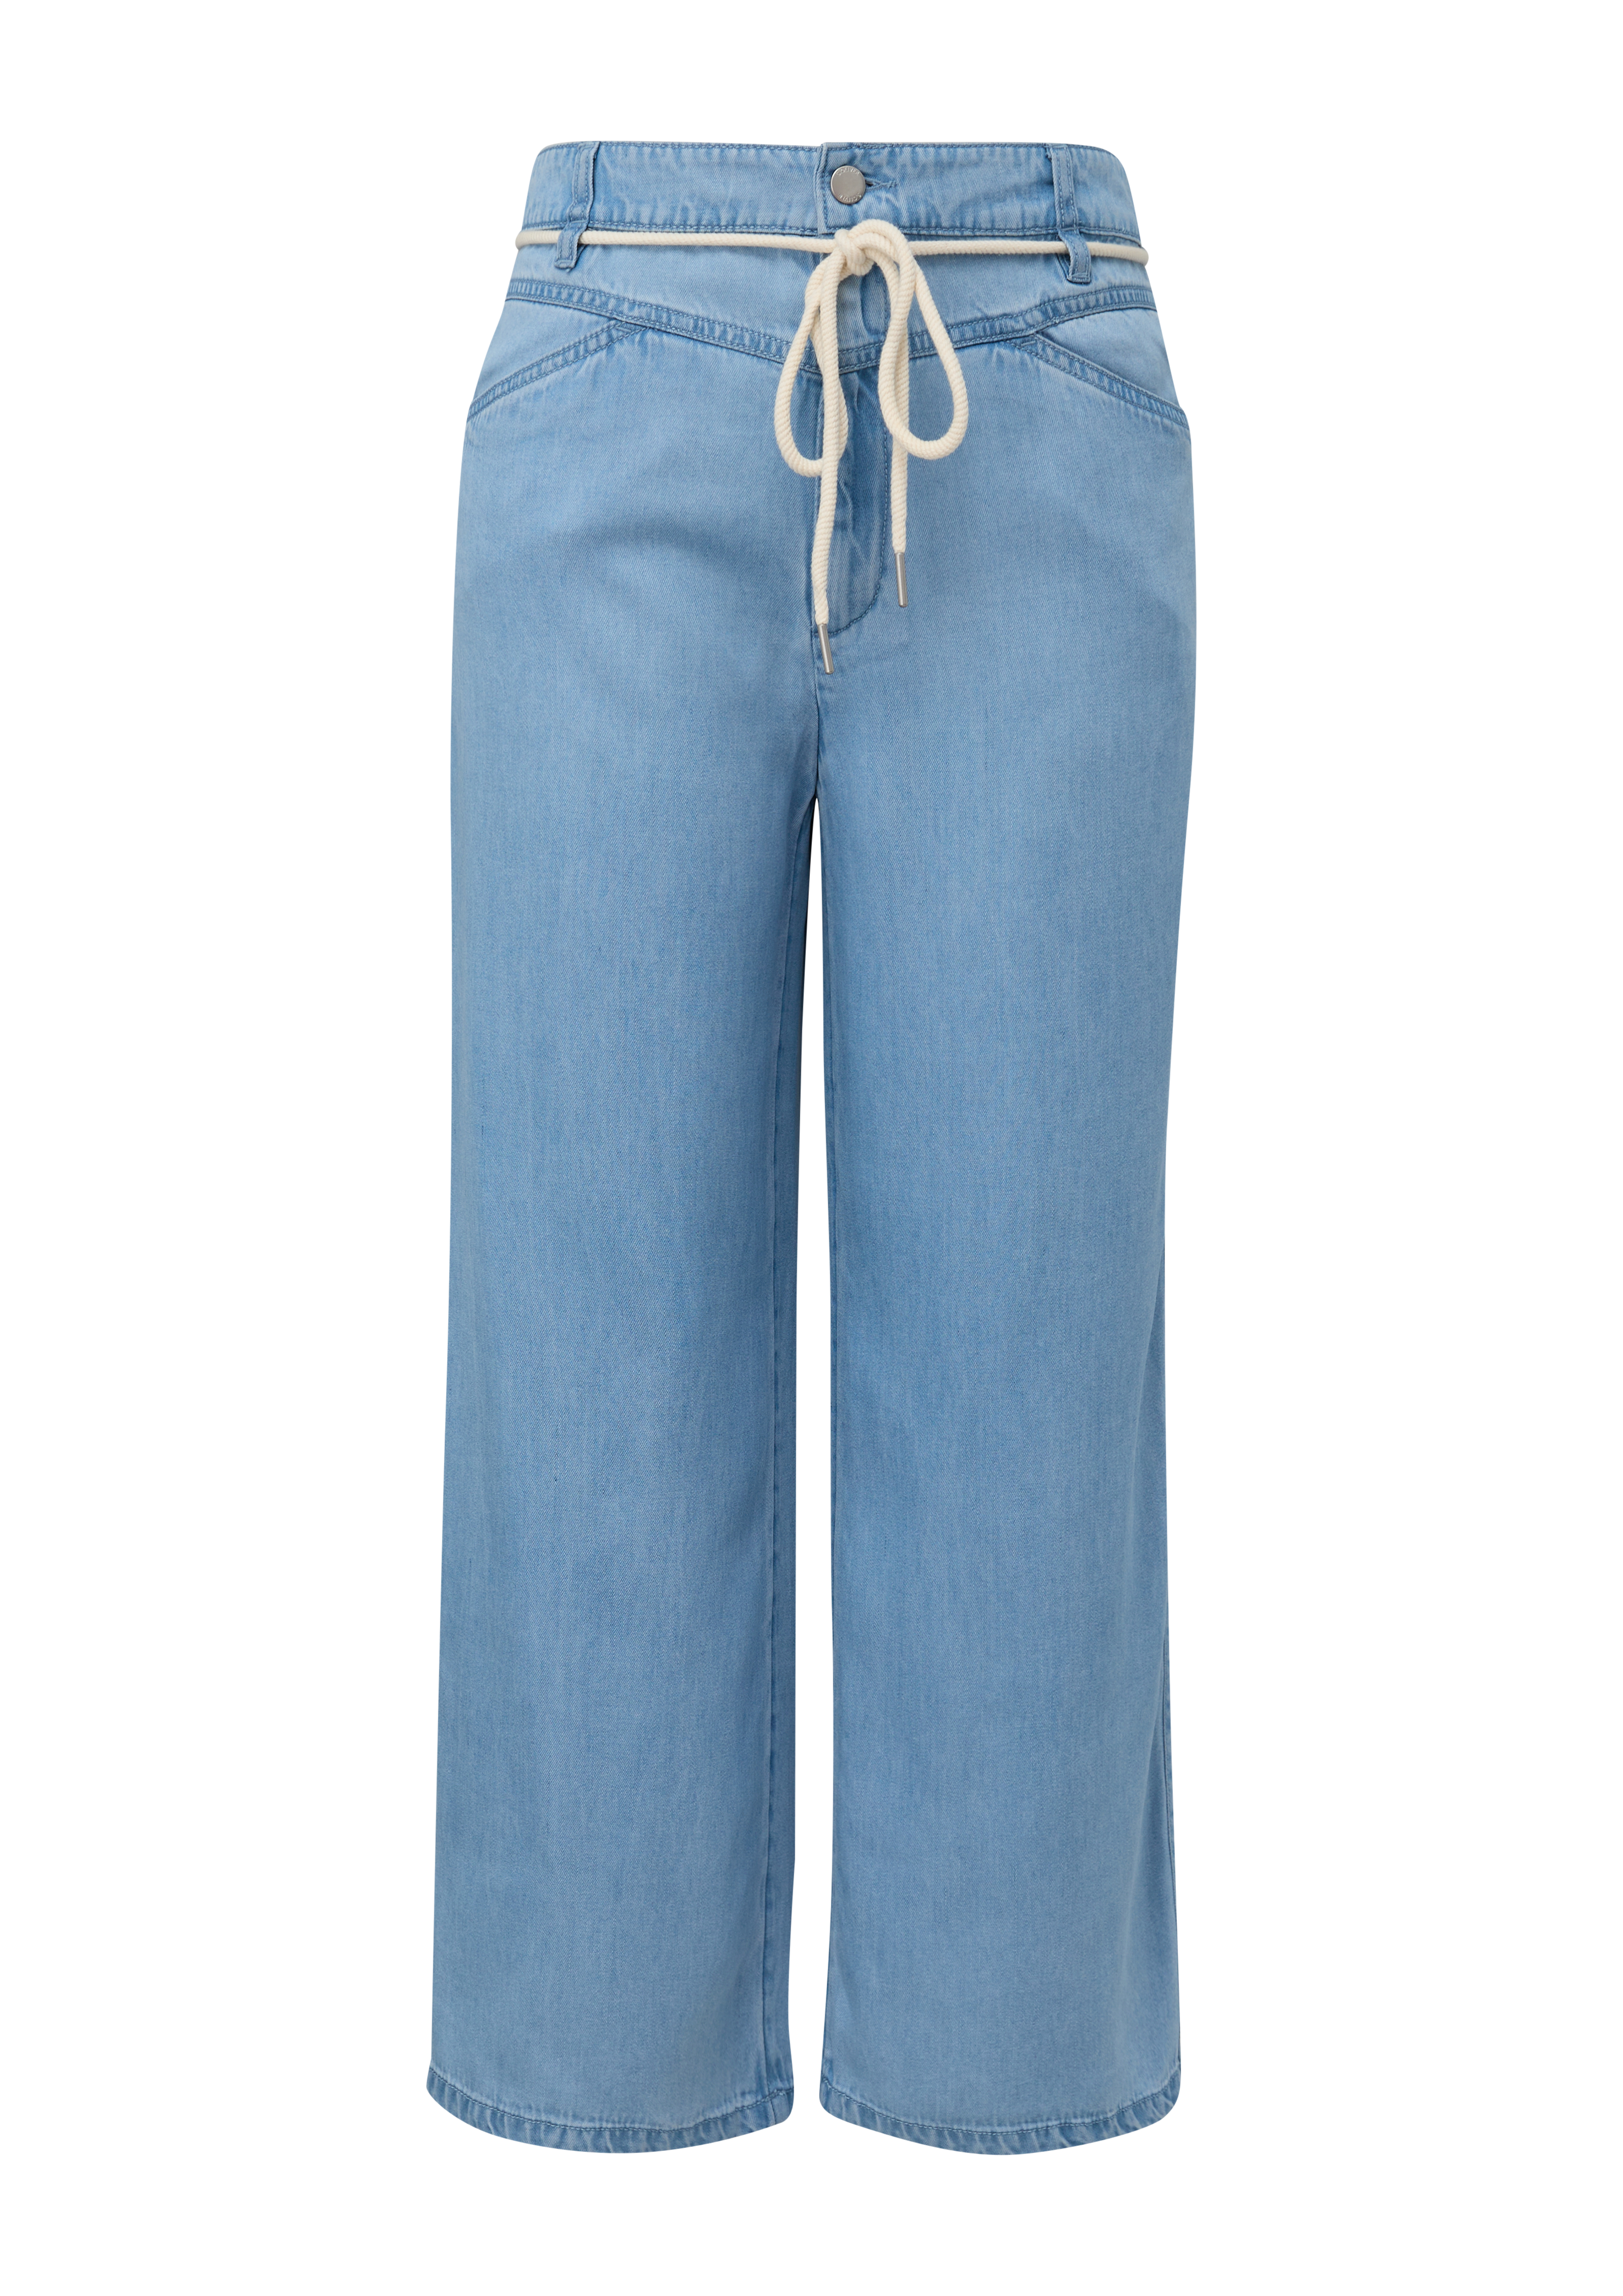 Satin jeans in 7/8 length with a fine garment wash